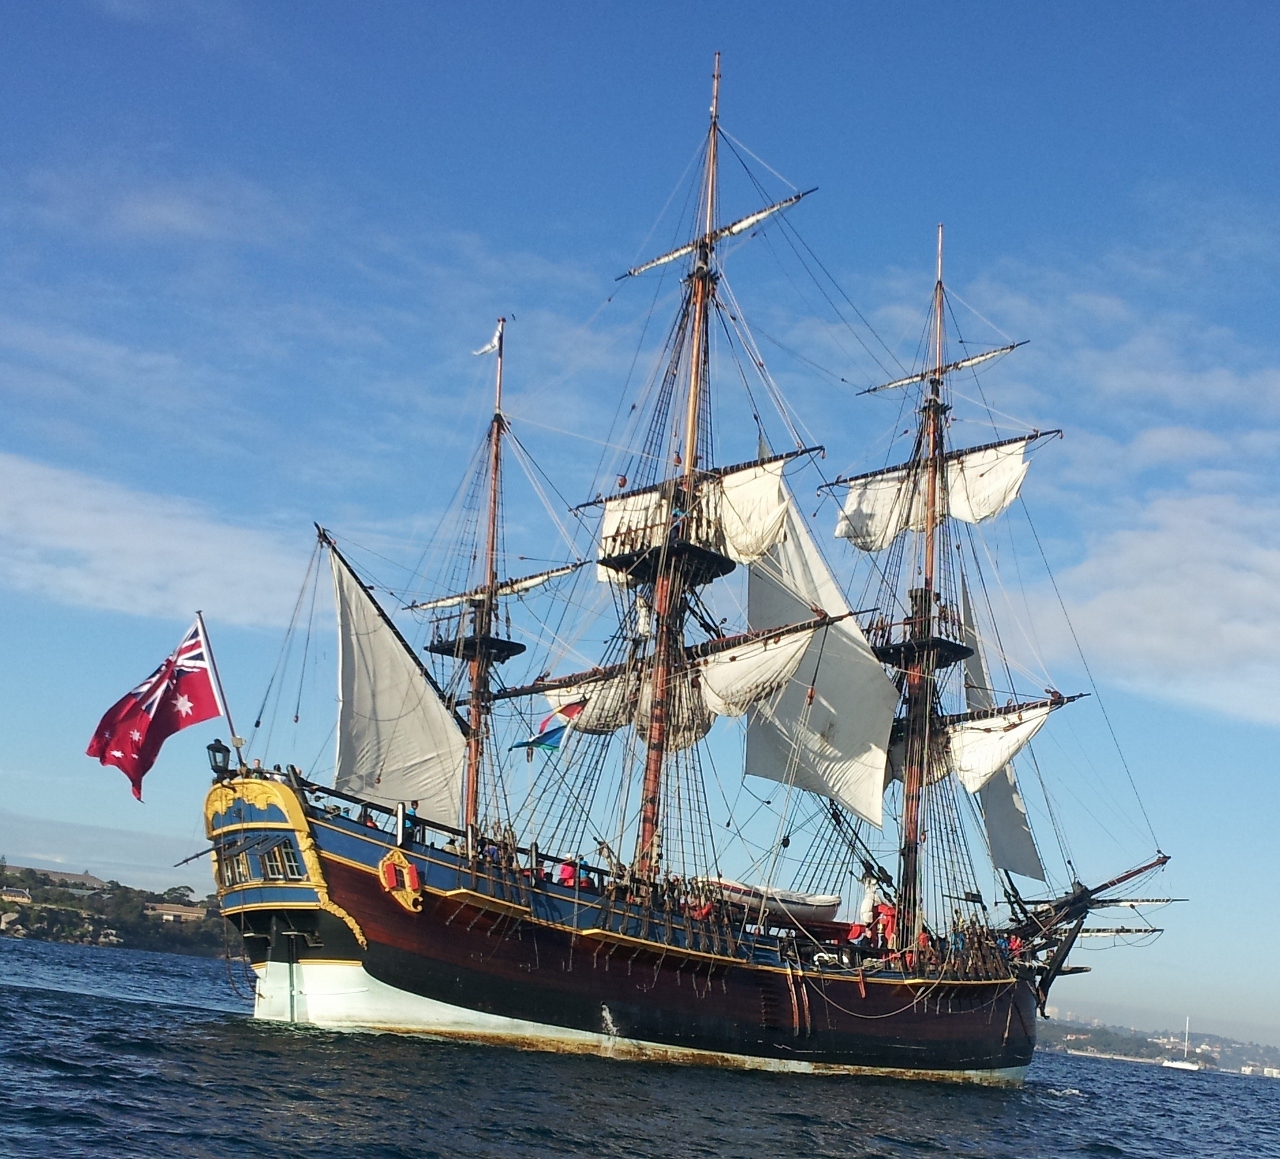 Endeavour sails home in triumph : newsbytes